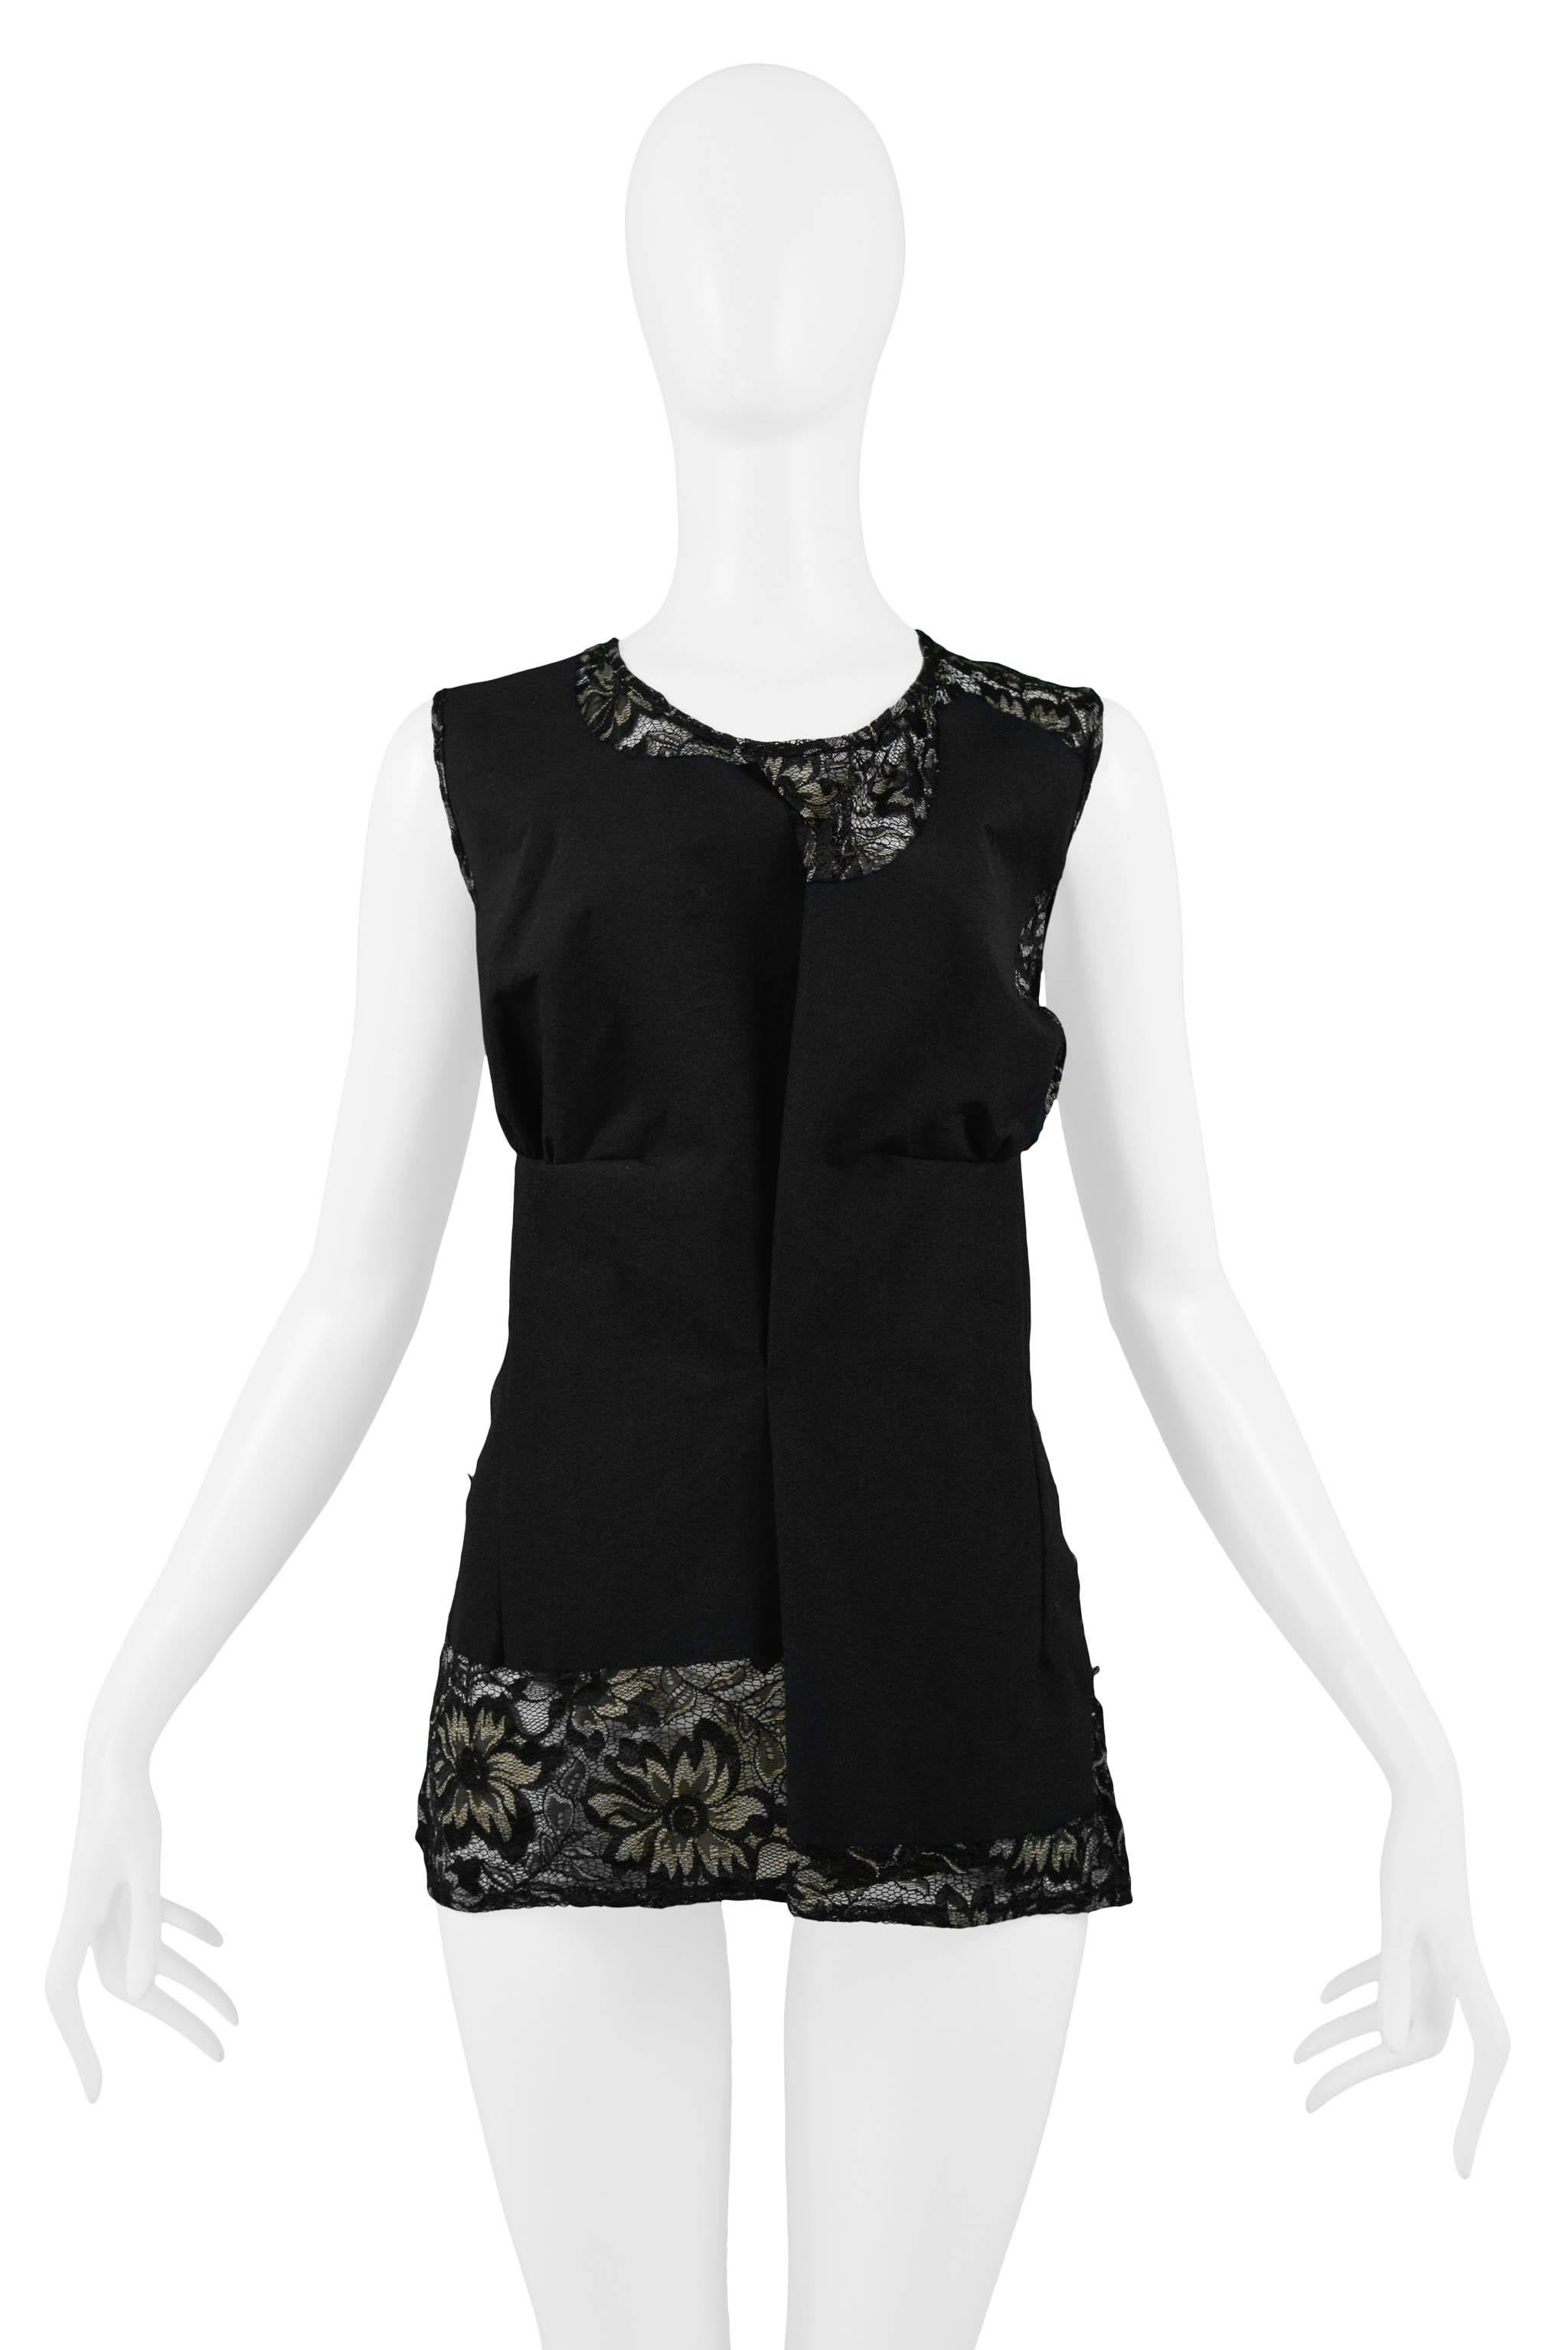 Resurrection Vintage is excited to offer a vintage Comme des Garcons black woven top featuring lace insets, high round neckline, deconstructed bodice, darts, and hip length. From the 1997 collection. 

Comme Des Garcons
Size: Medium
Fabric: Woven &